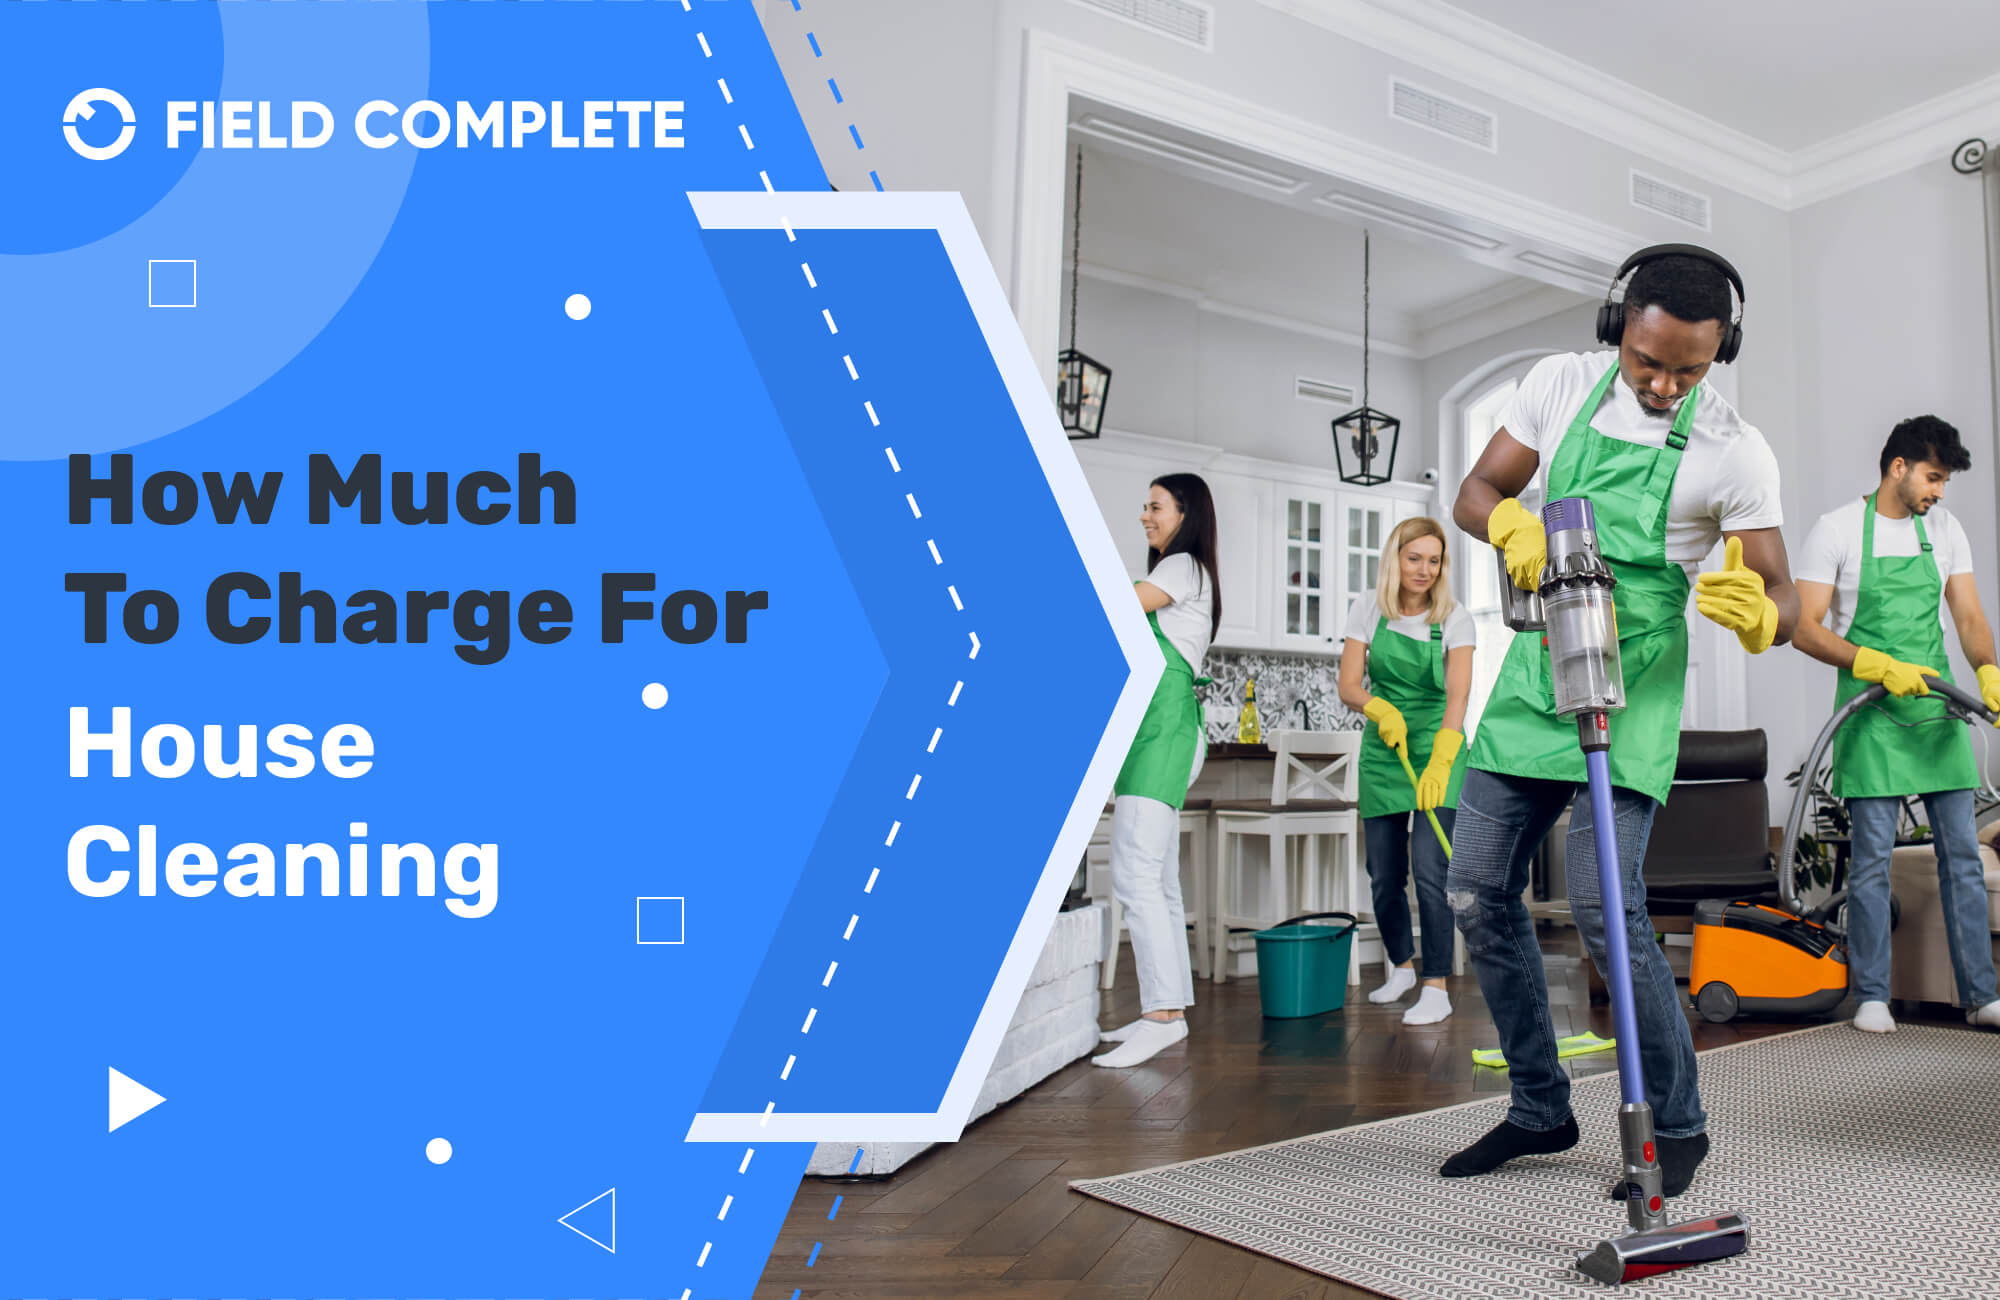 http://fieldcomplete.com/wp-content/uploads/2022/05/How-Much-To-Charge-For-House-Cleaning.-Cleaning-Service-Price-List.jpg